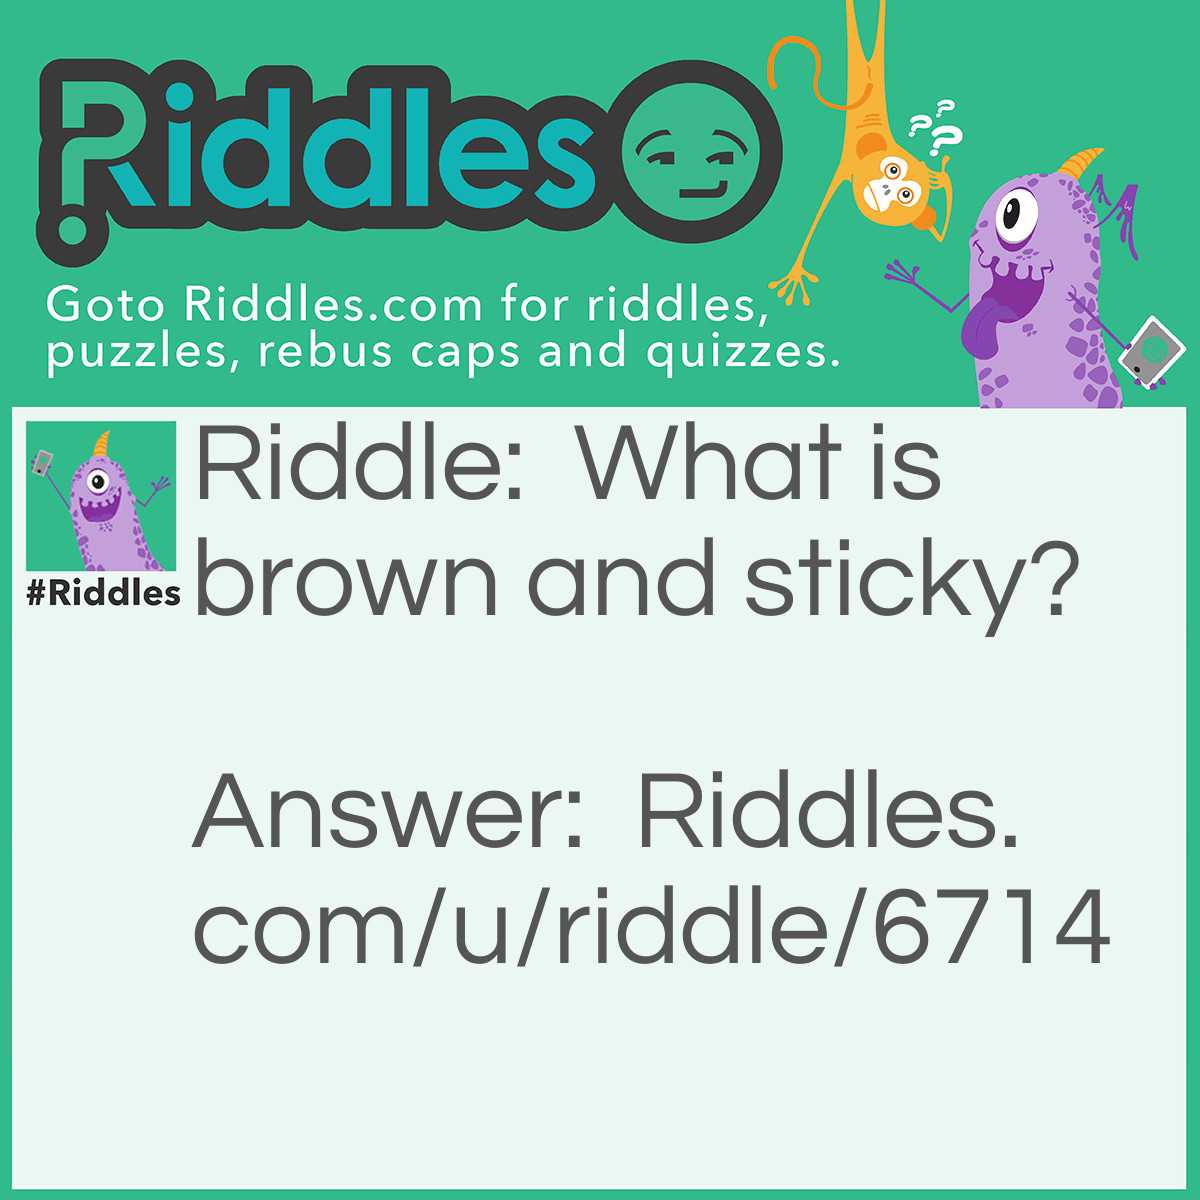 Riddle: What is brown and sticky? Answer: A stick.